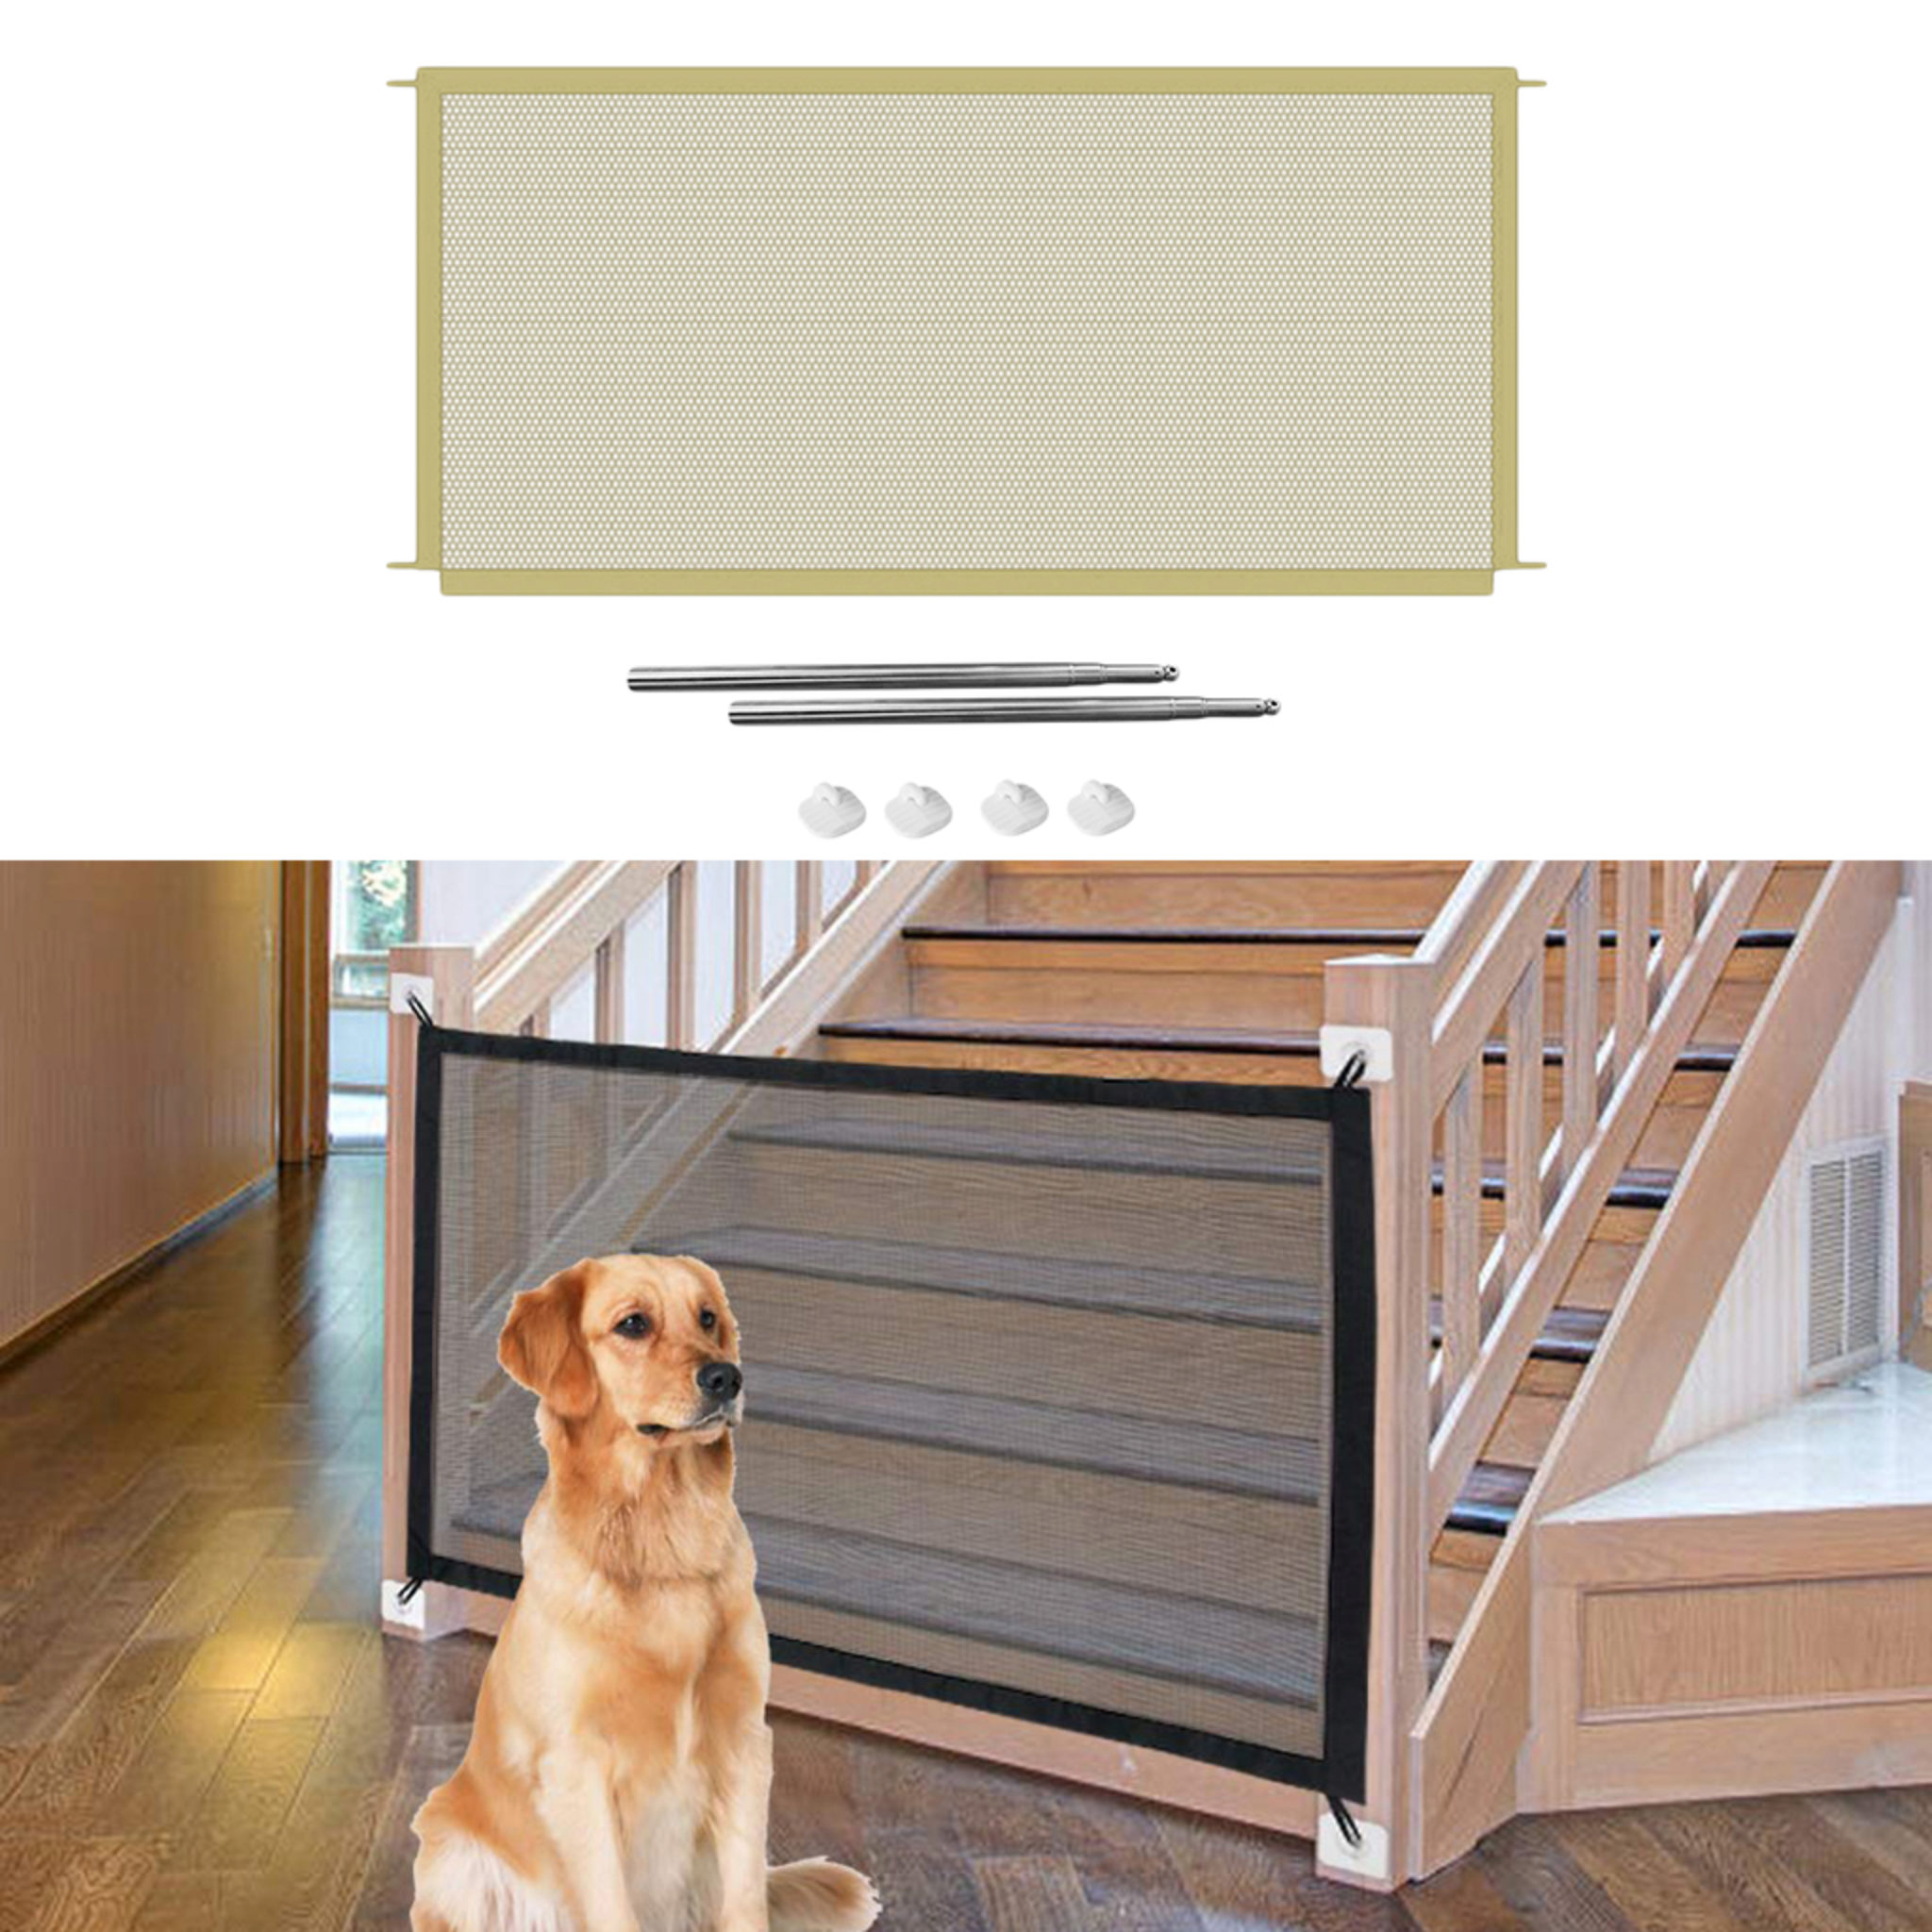 The Best Electronic Dog Doors Review